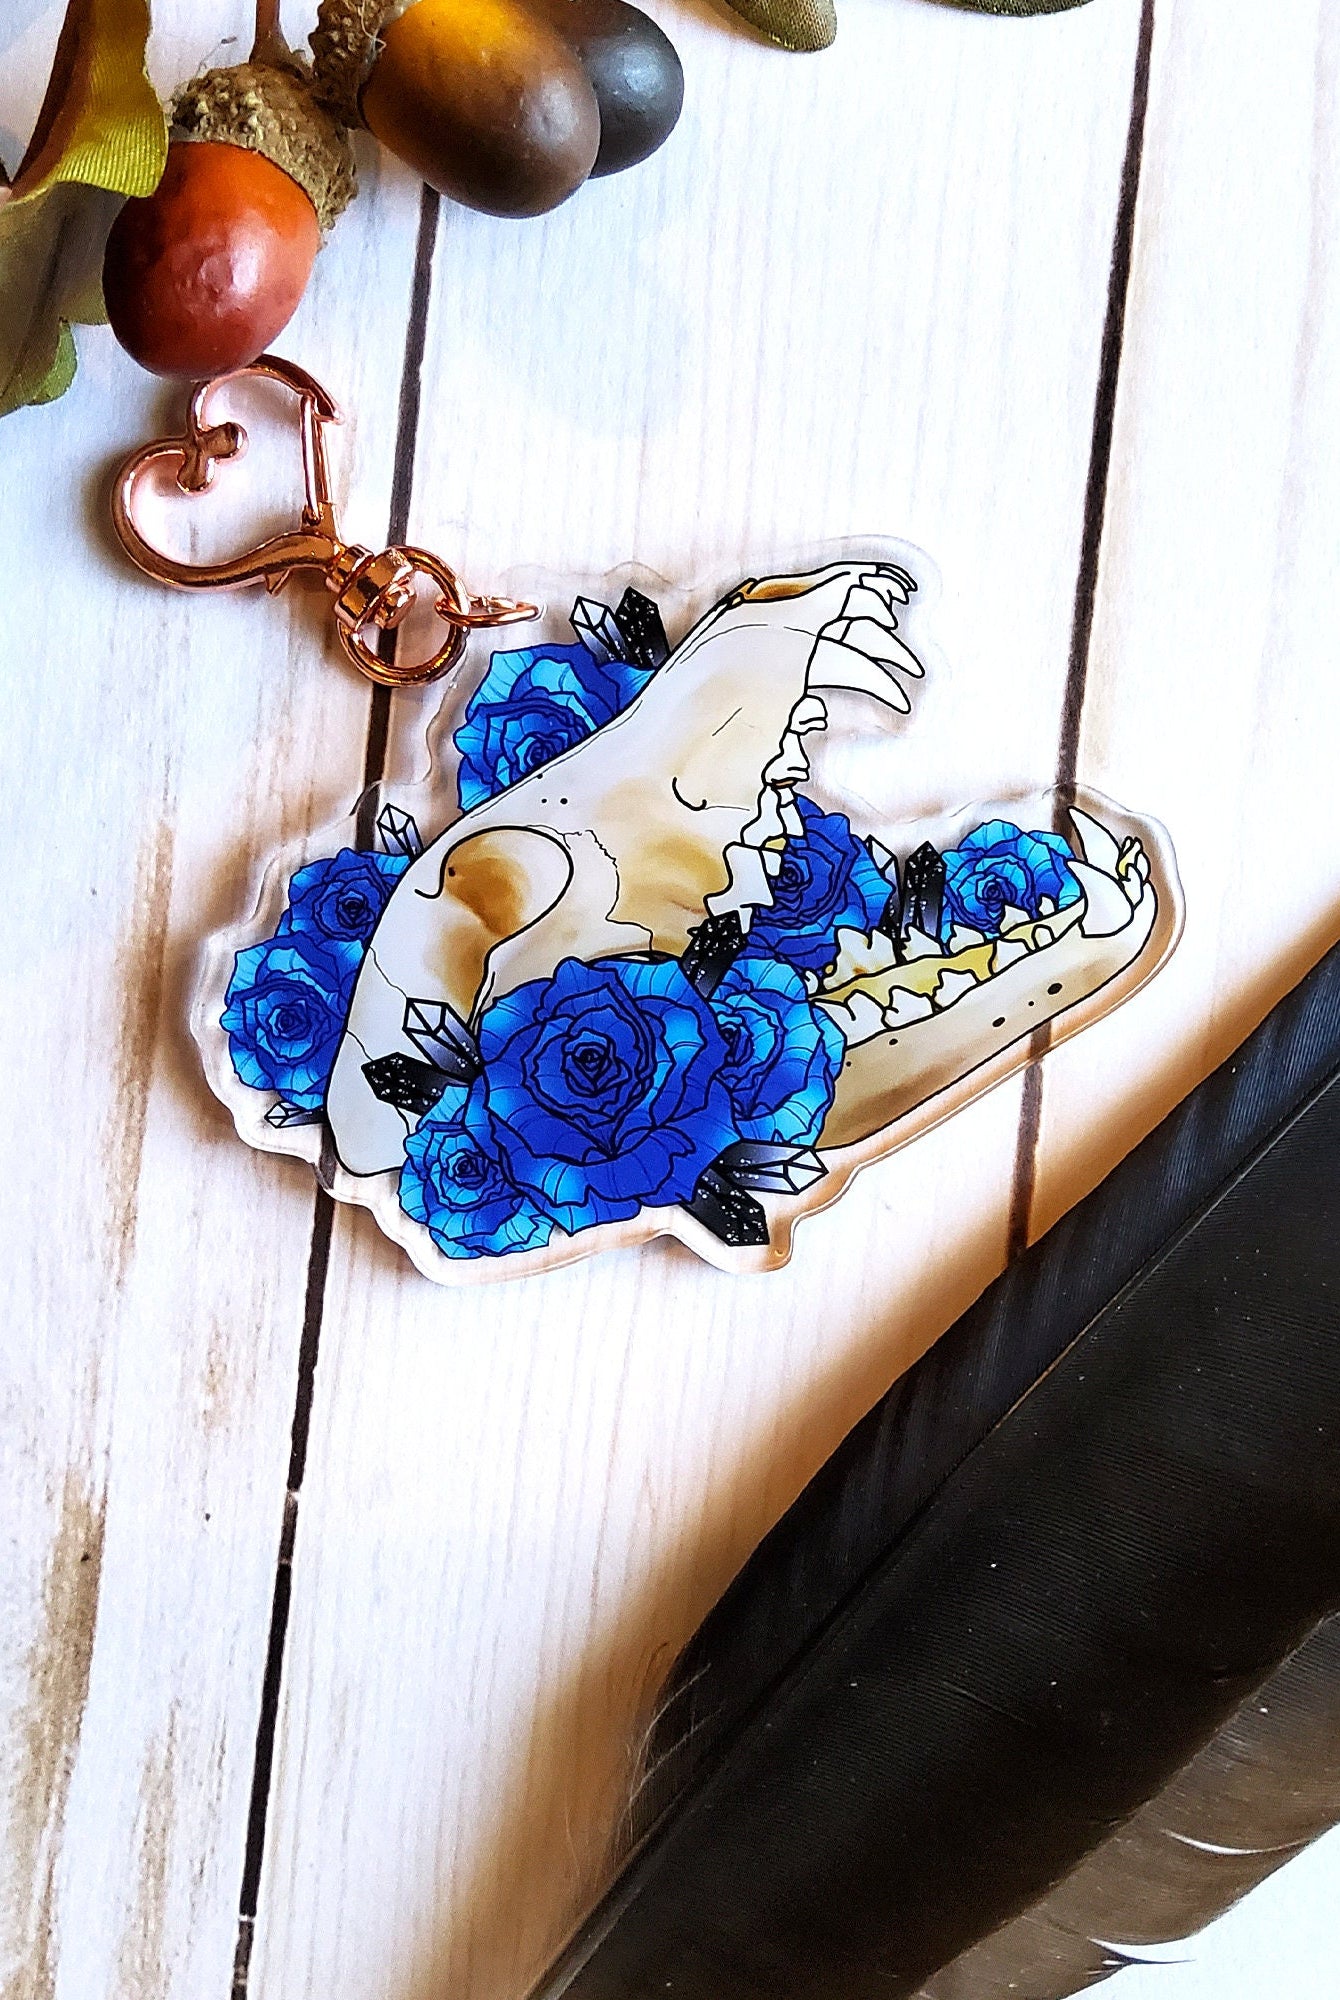 ACRYLIC CHARM Double Sided: Wolf Skull and Roses , Wolf Skull Charm , Skull Charm , Skull and Roses Charm , Wolf Skull Charm , Goth Charm